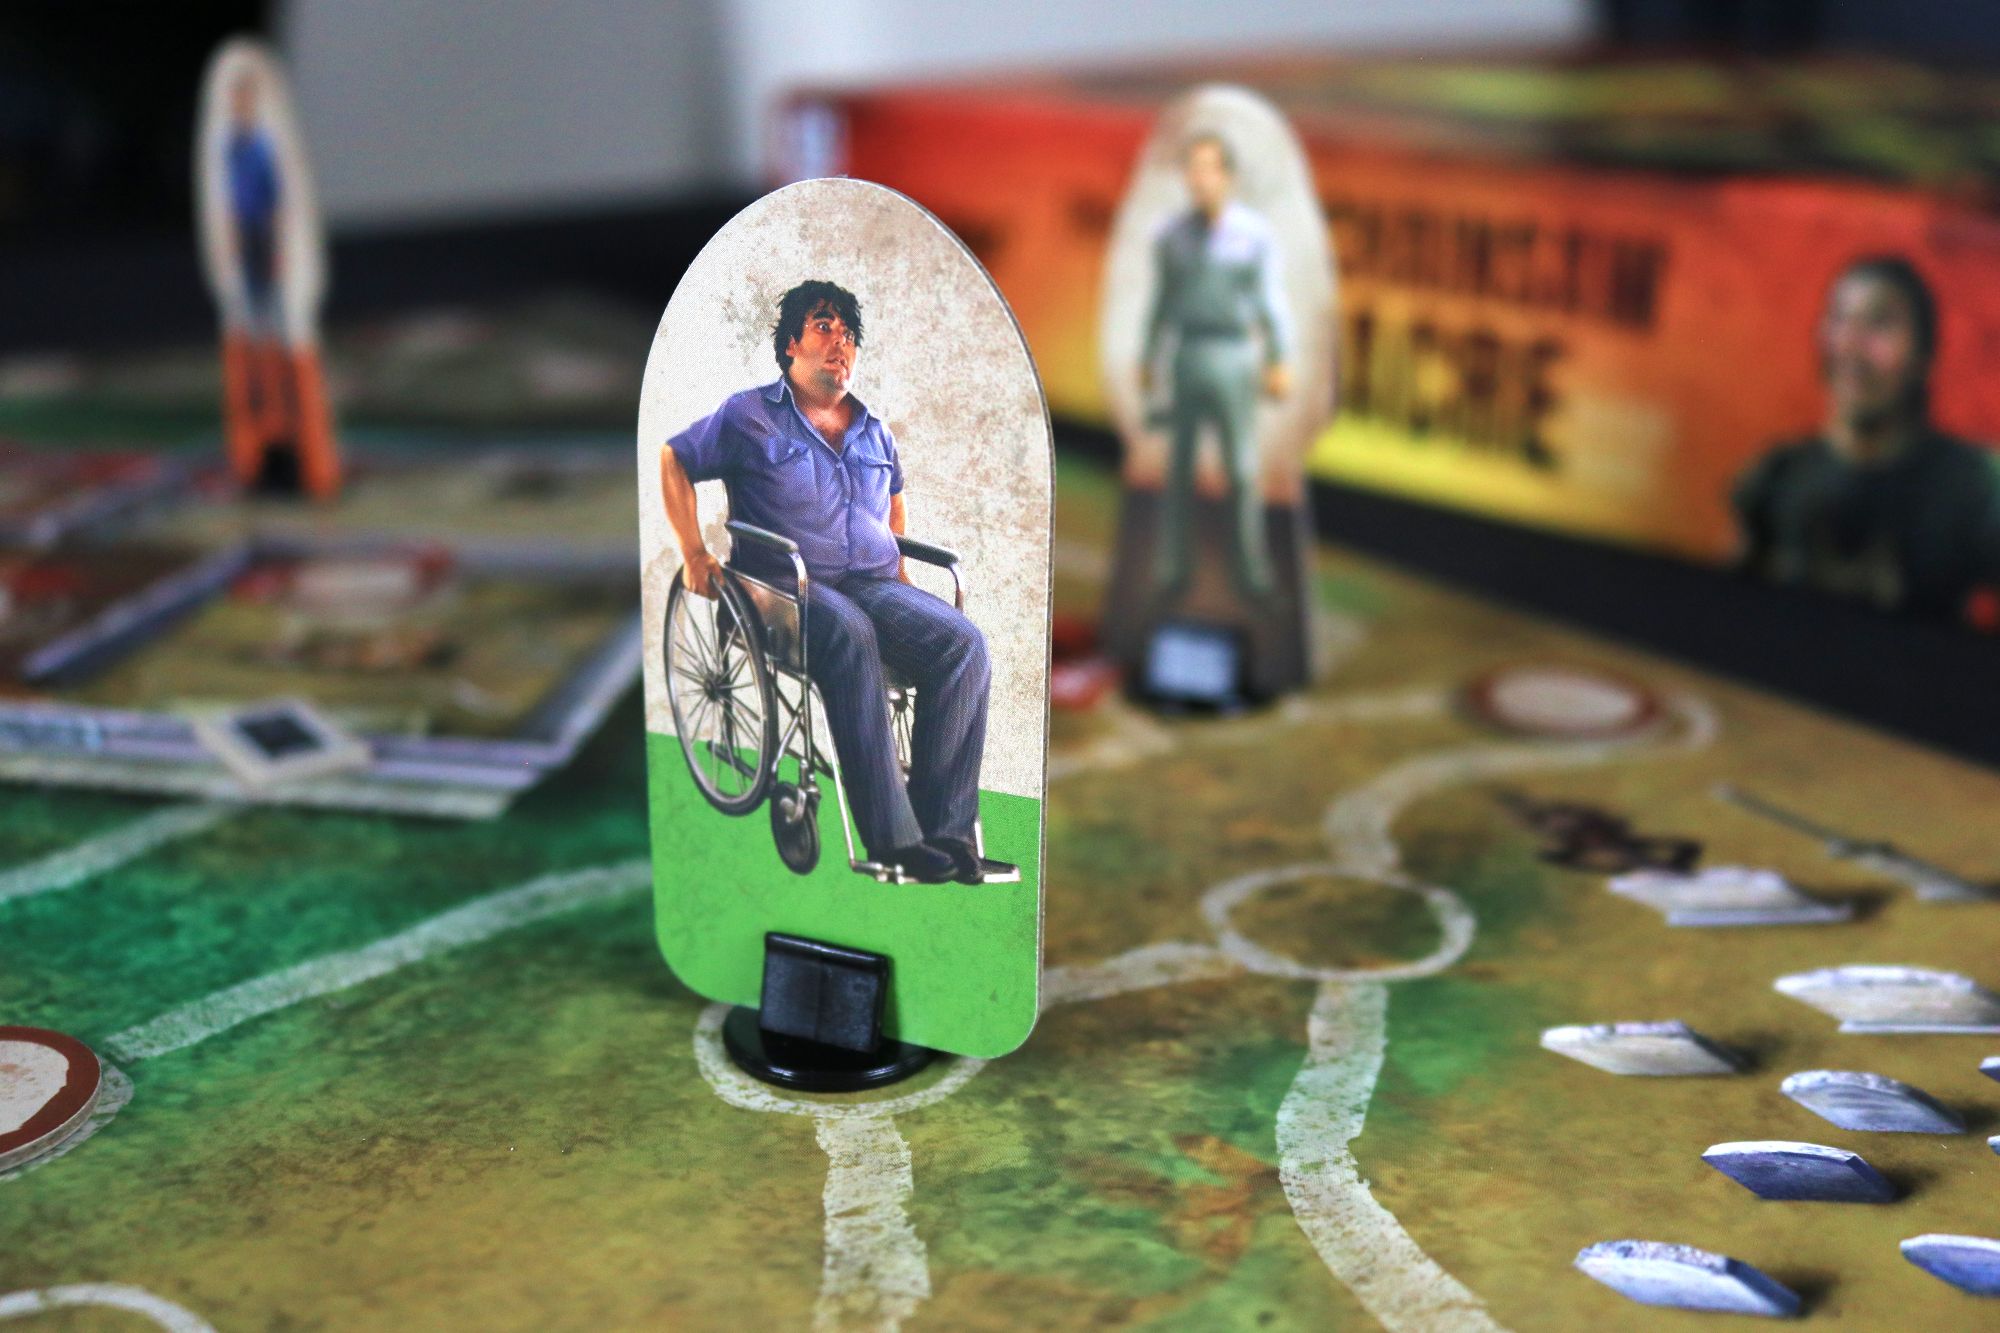 The Texas Chainsaw Massacre Board Game - Franklin standee